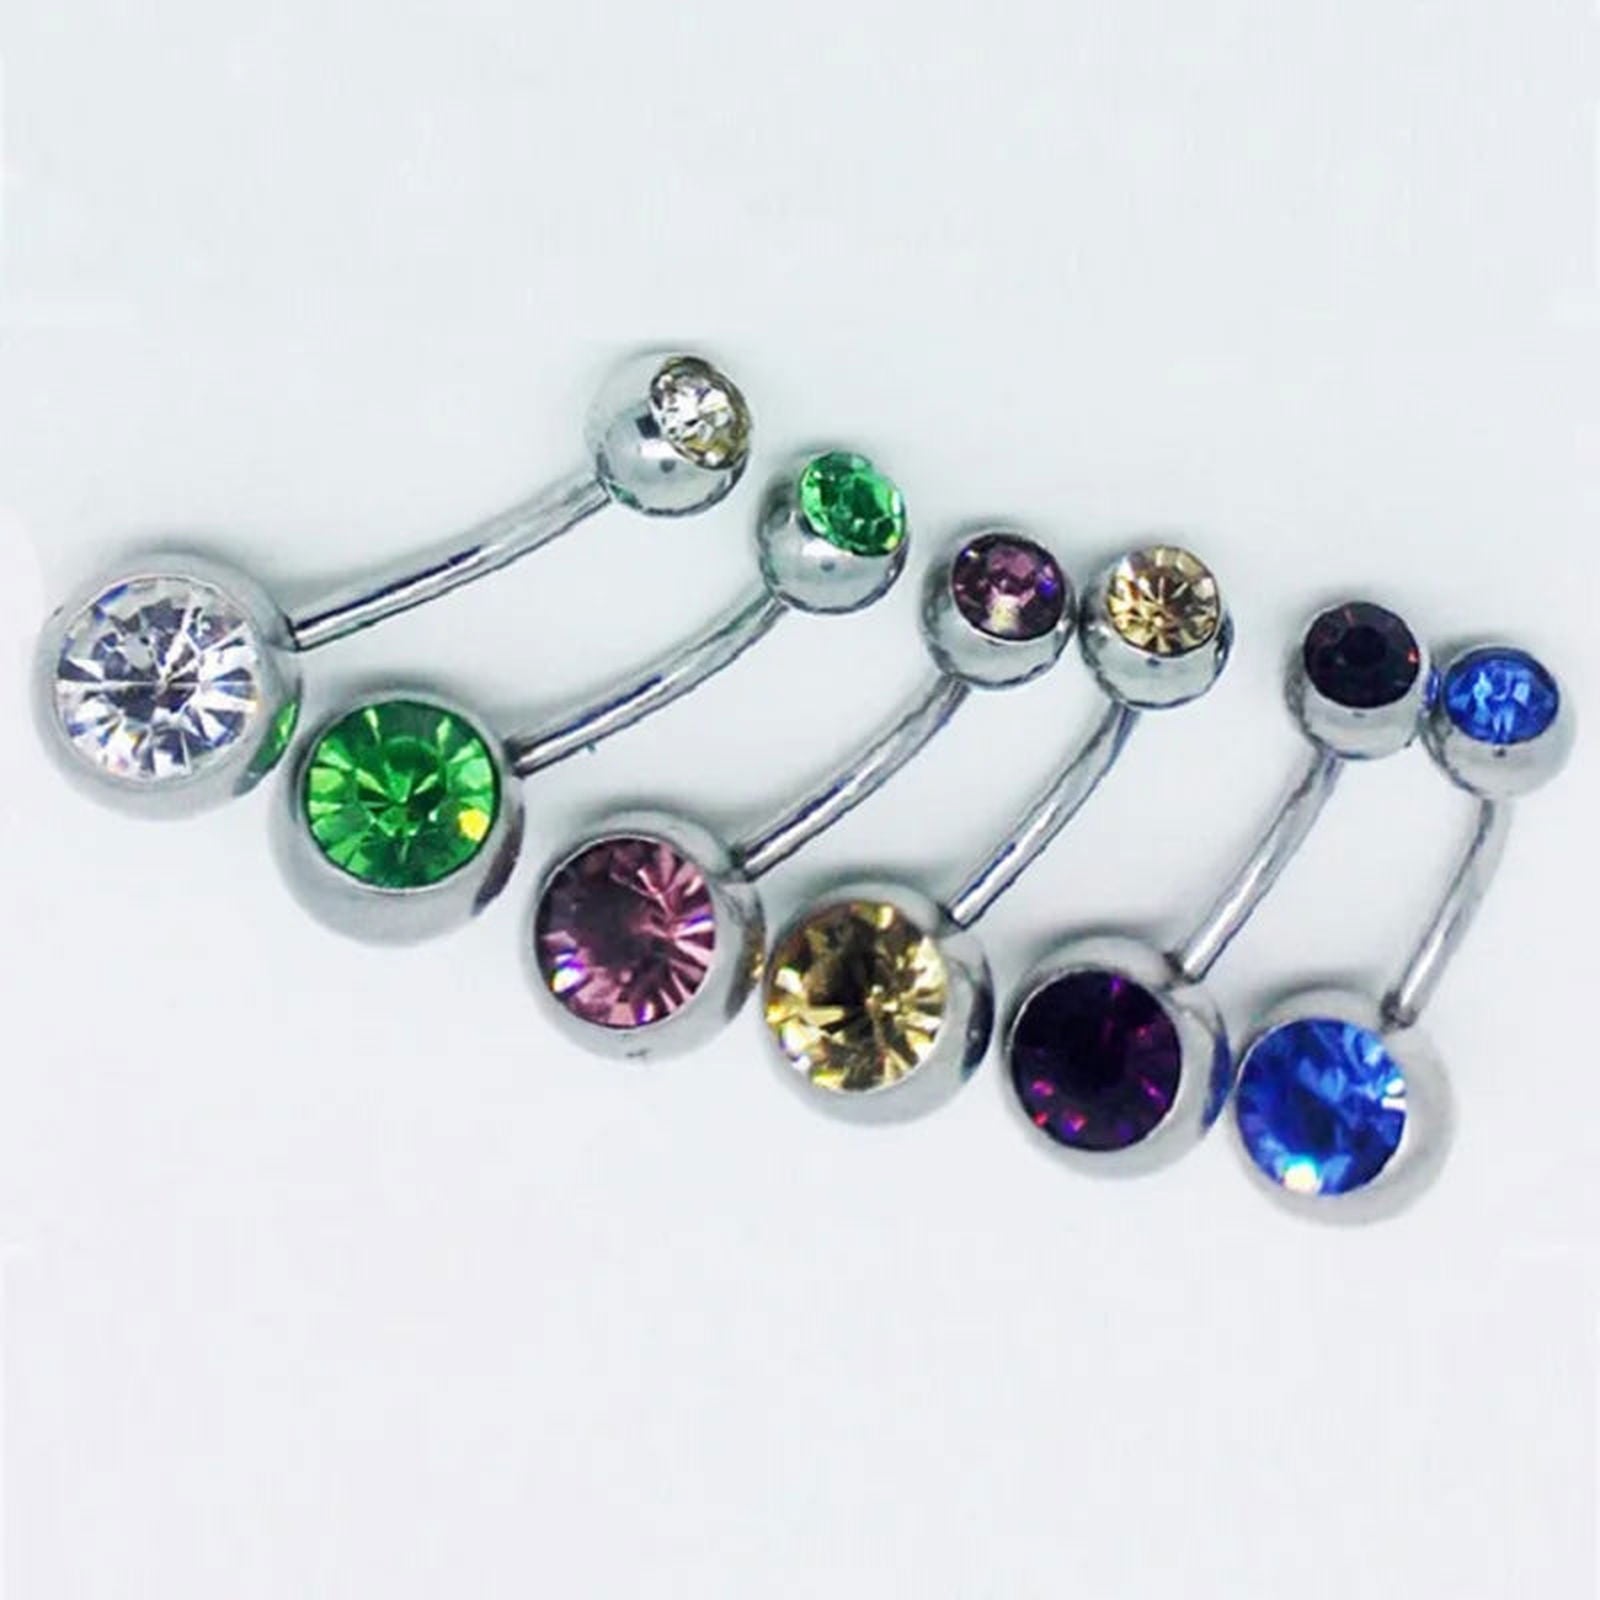 10 pcs/lot Piercing Navel Surgical Steel Single Crystal Rhinestone Belly Button Rings - ARCHE